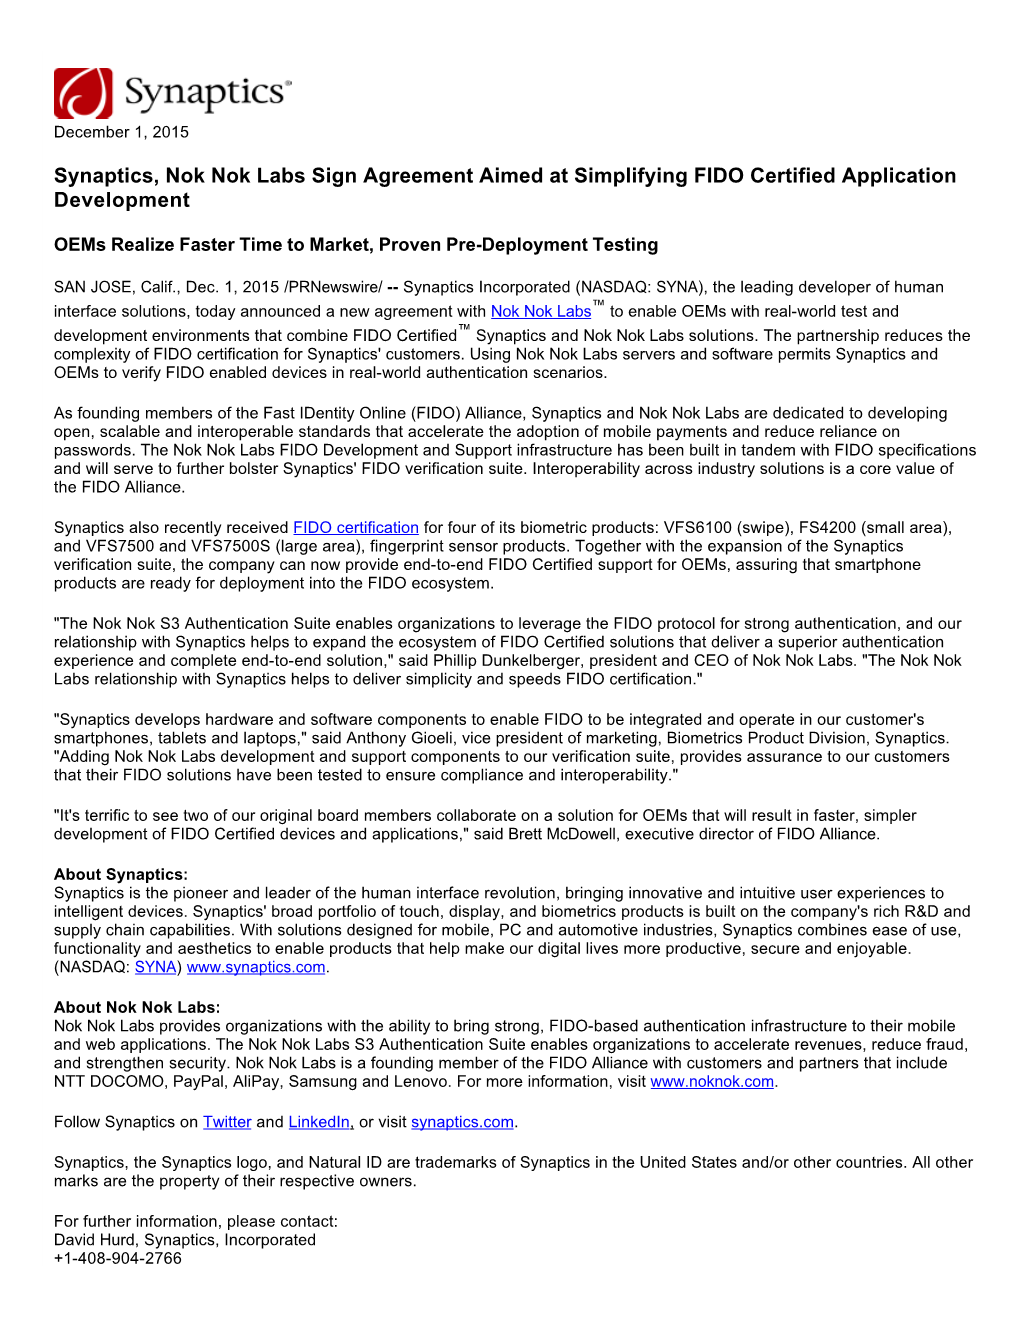 Synaptics, Nok Nok Labs Sign Agreement Aimed at Simplifying FIDO Certified Application Development